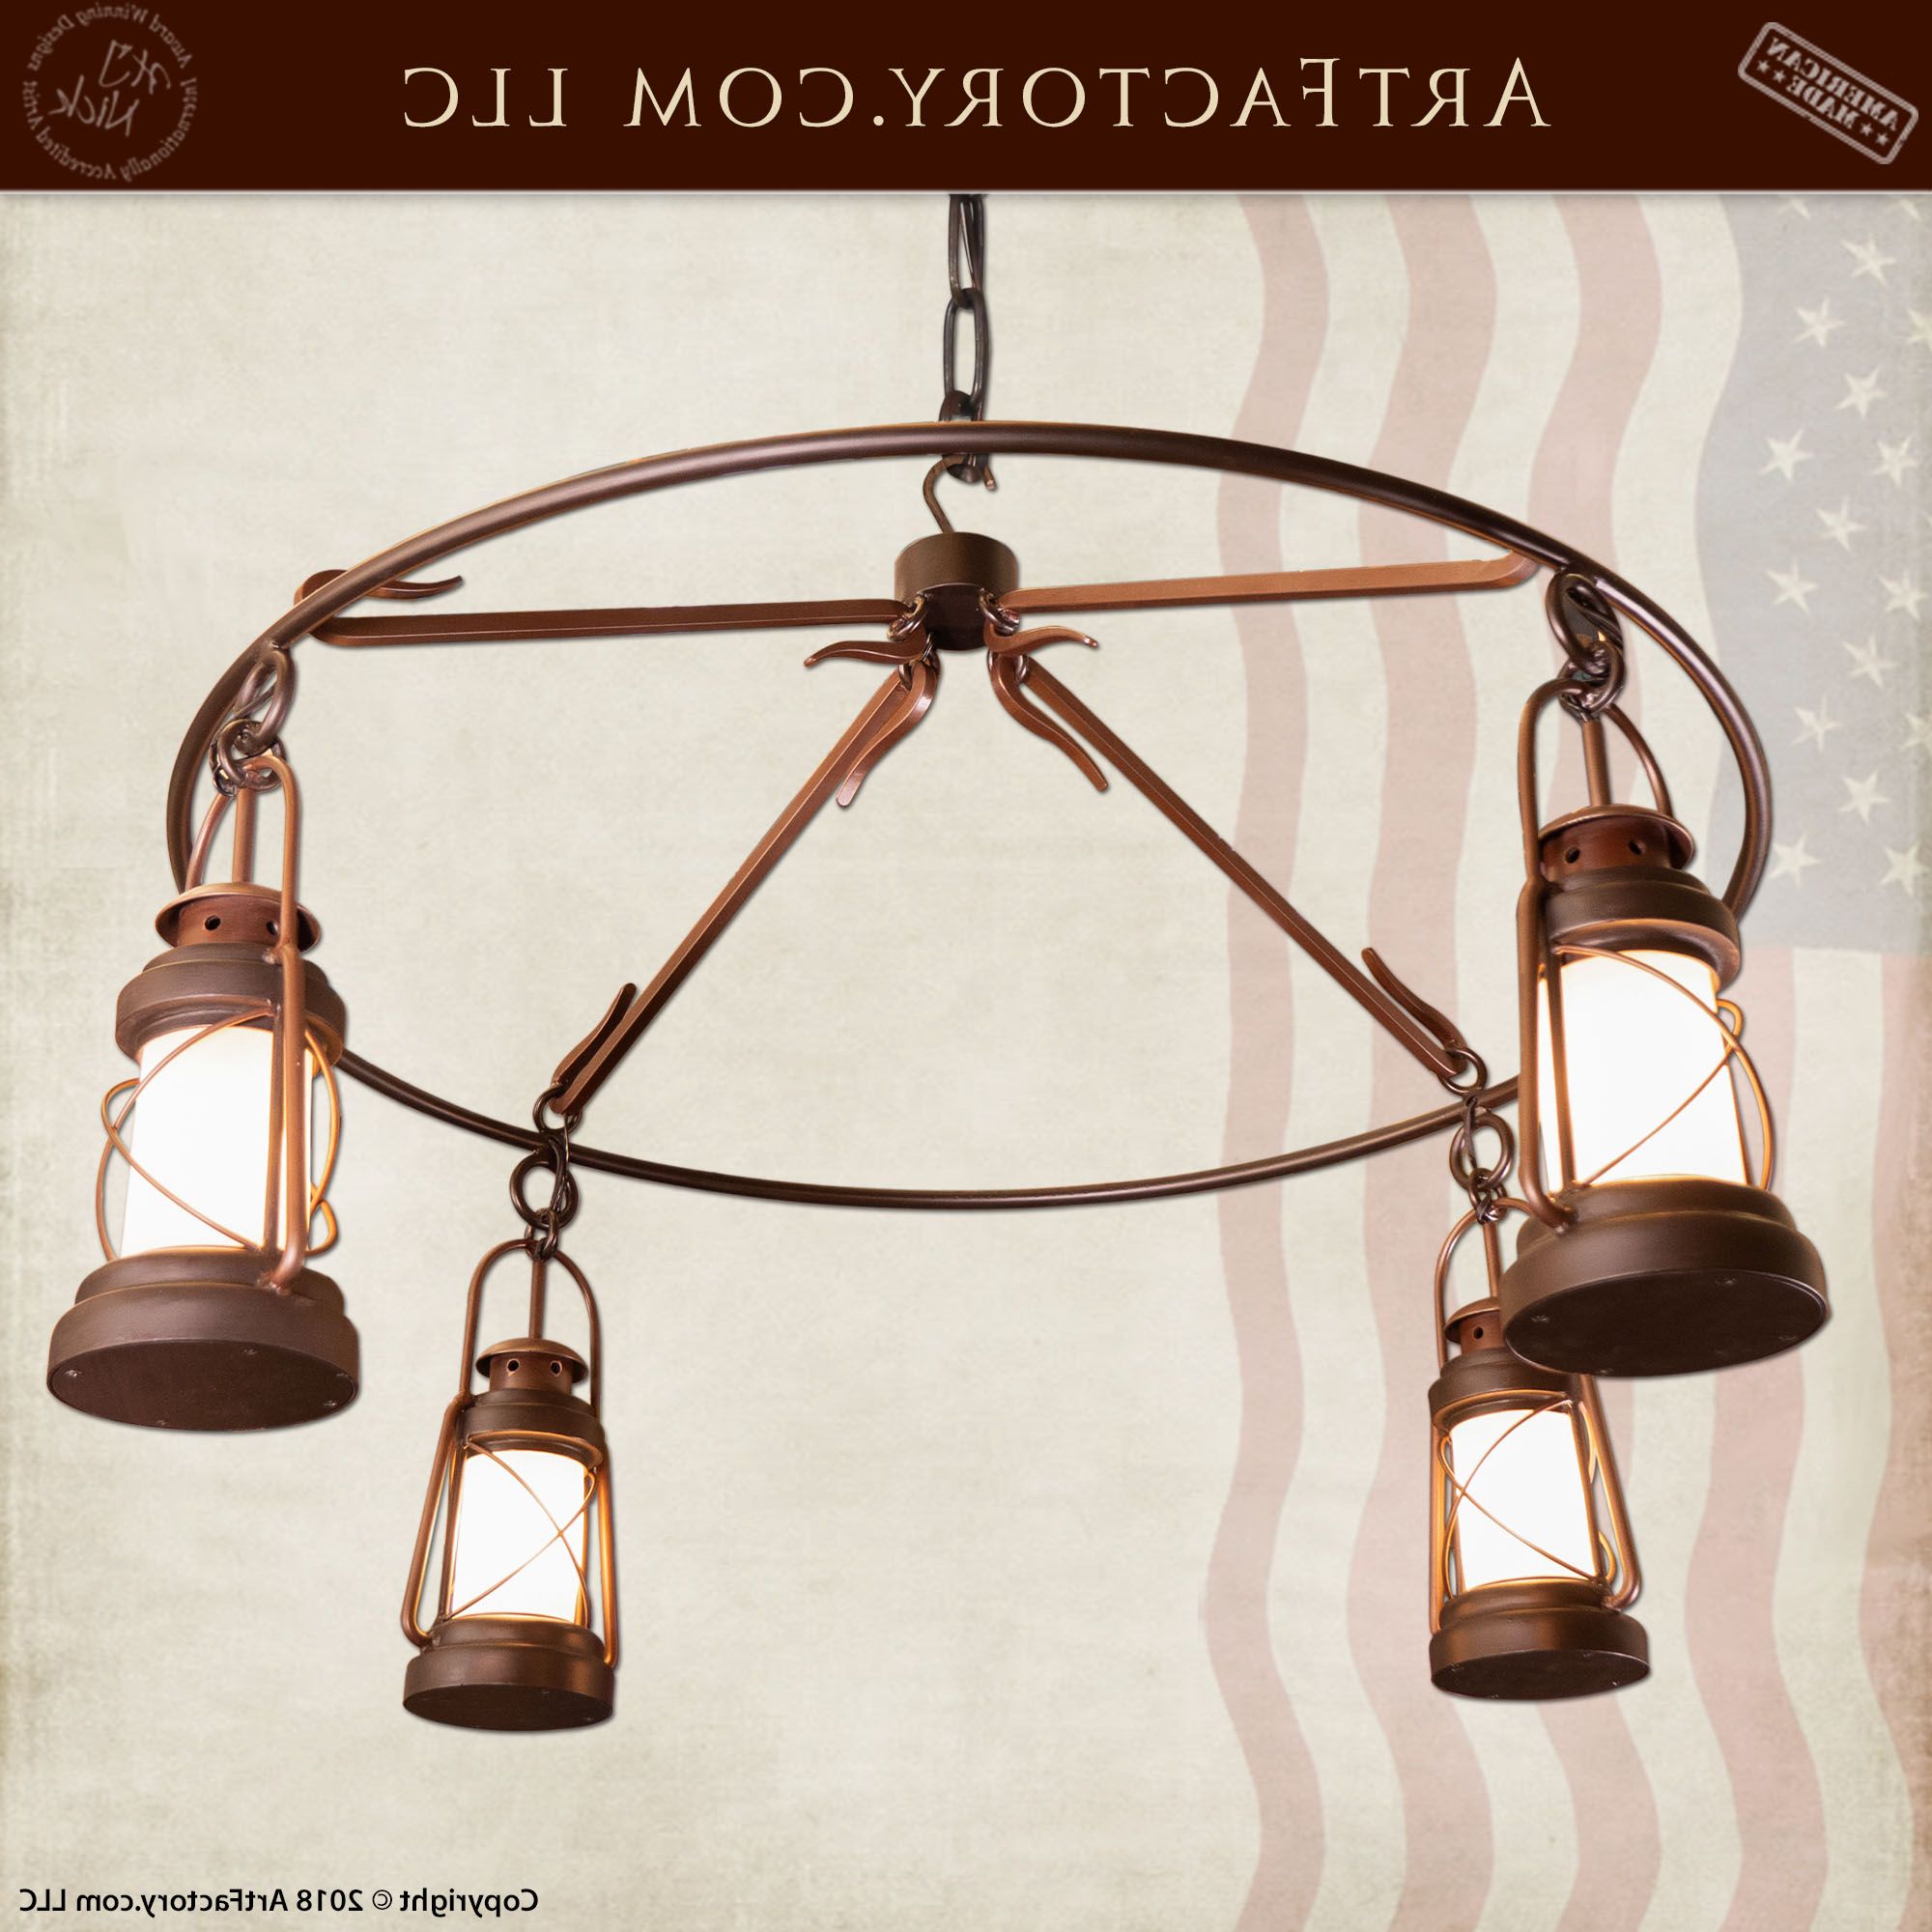 Widely Used Forged Iron Lantern Chandeliers Pertaining To Wrought Iron Lantern Chandelier: Hand Forgedmaster Blacksmiths (View 10 of 15)